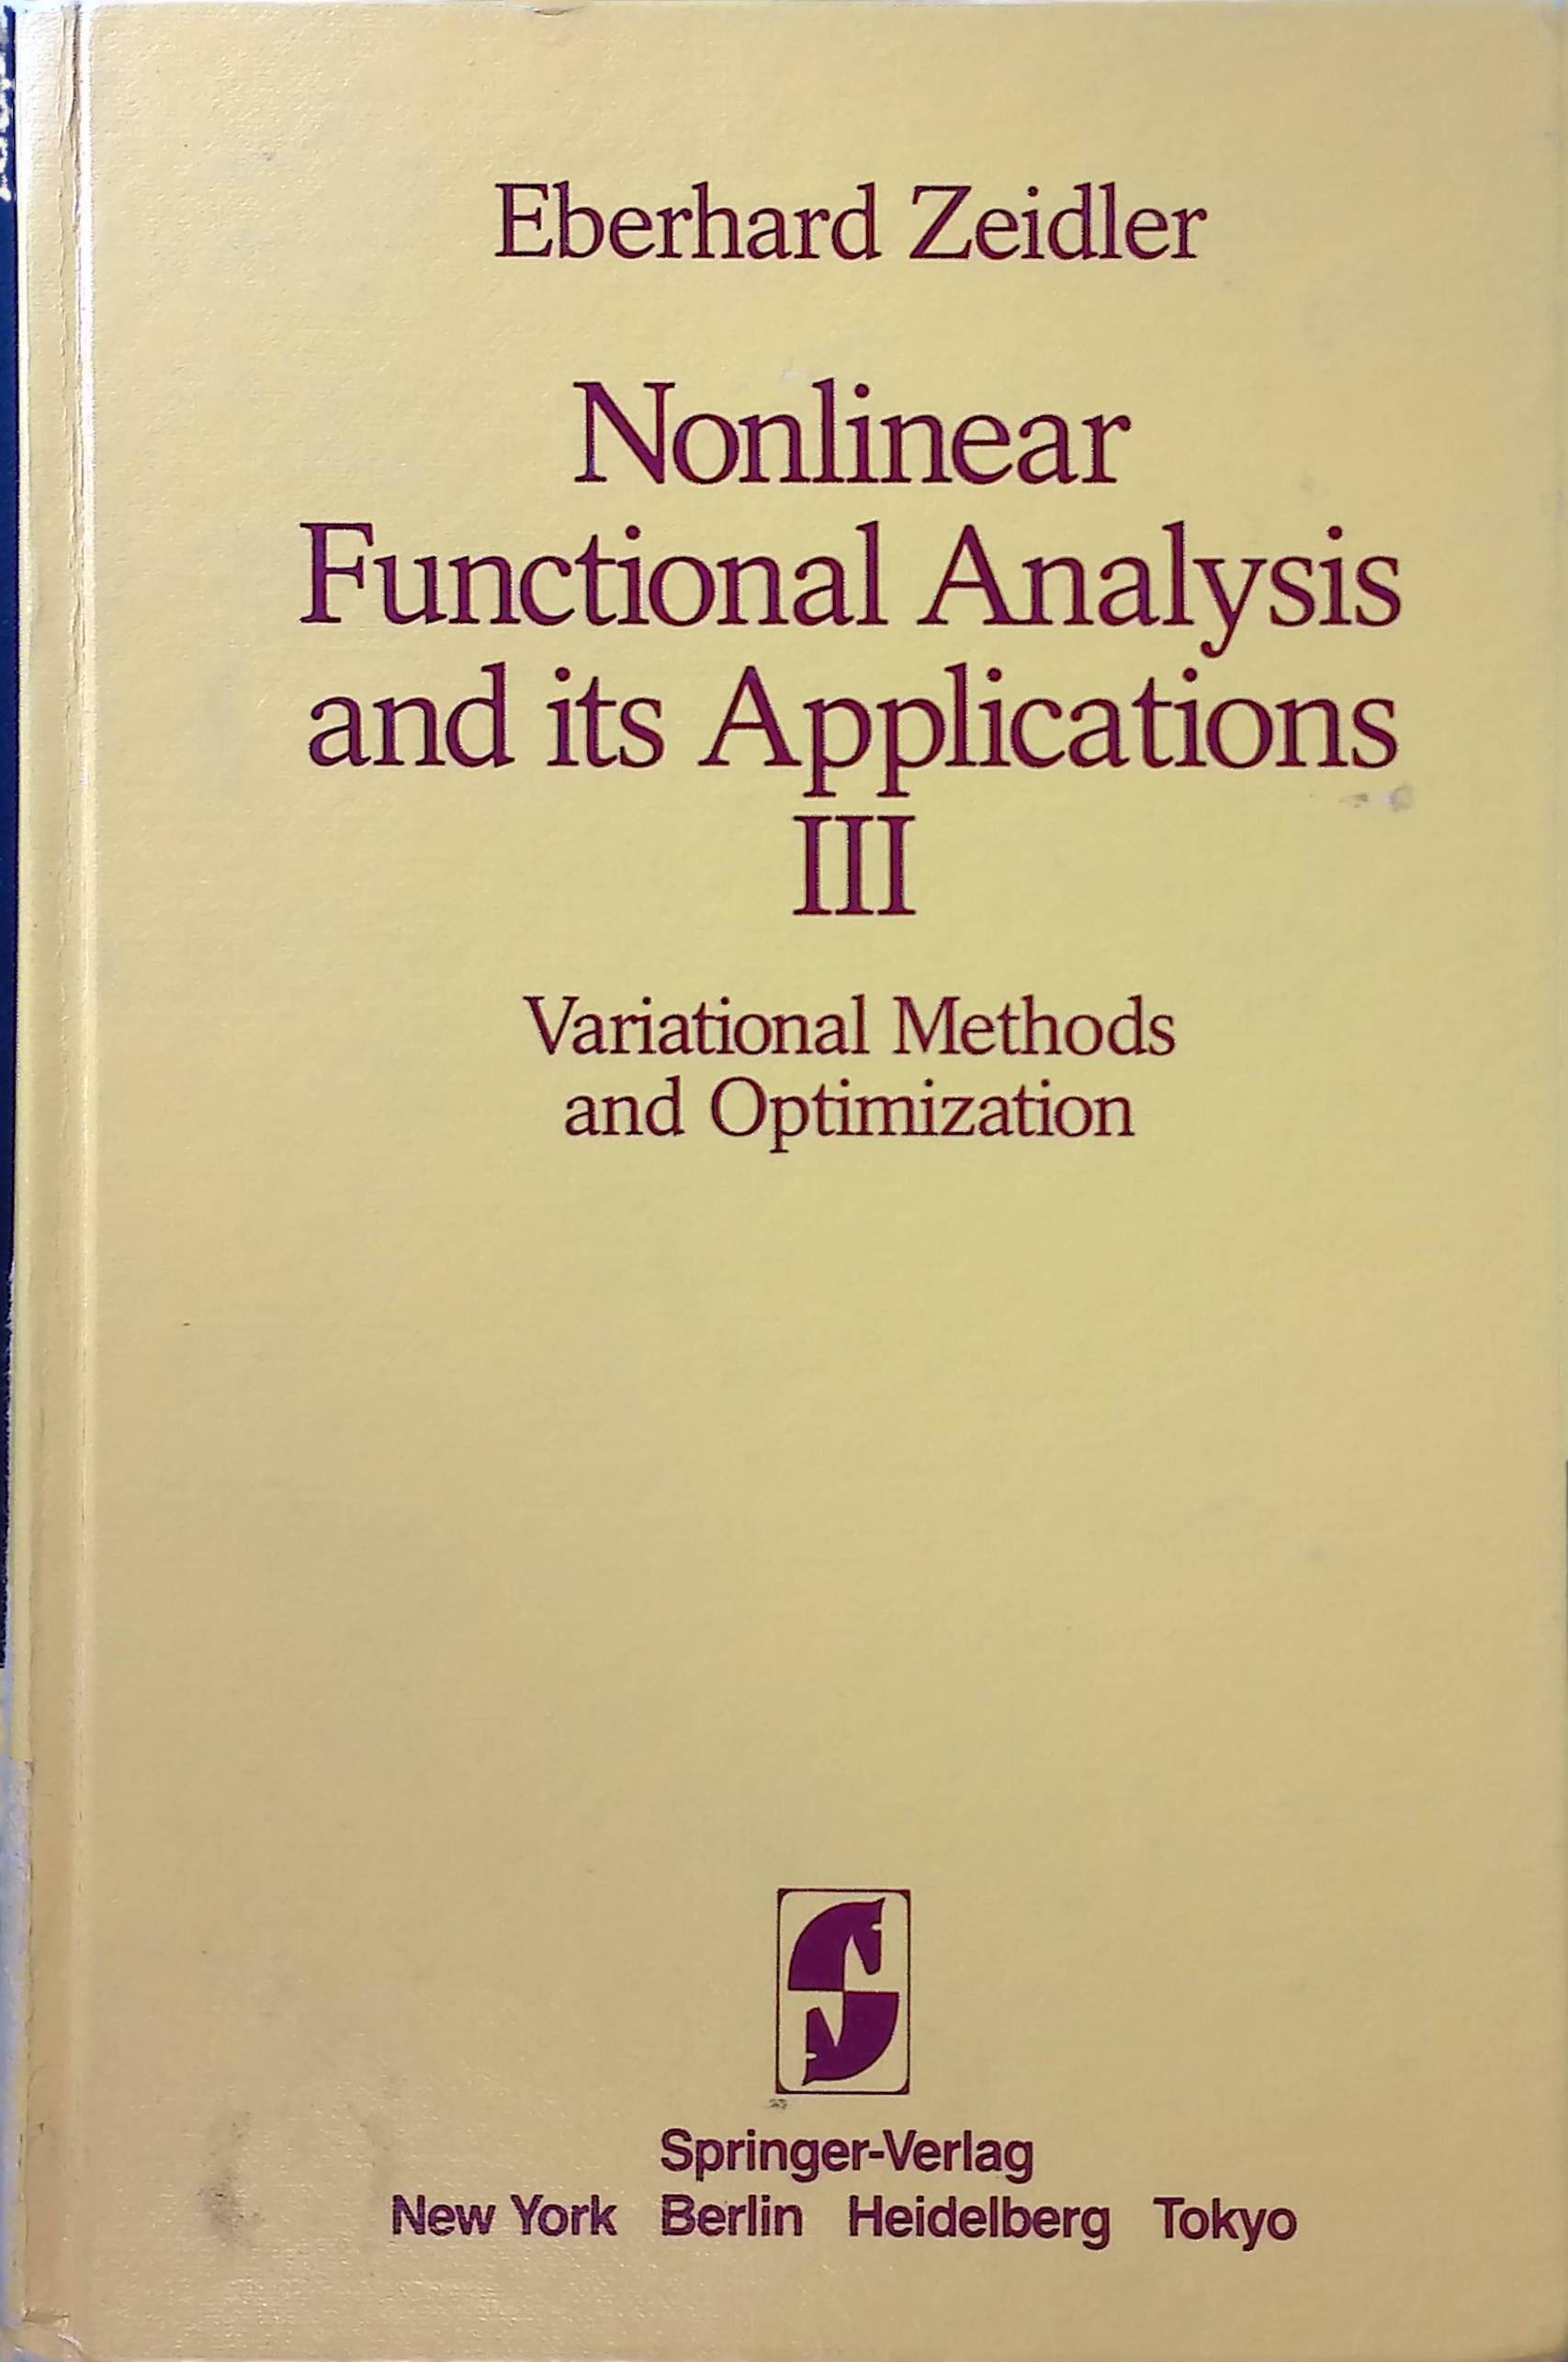 Nonlinear functional analysis and its applications, 3: Variational methods and optimization. - Zeidler, Eberhard